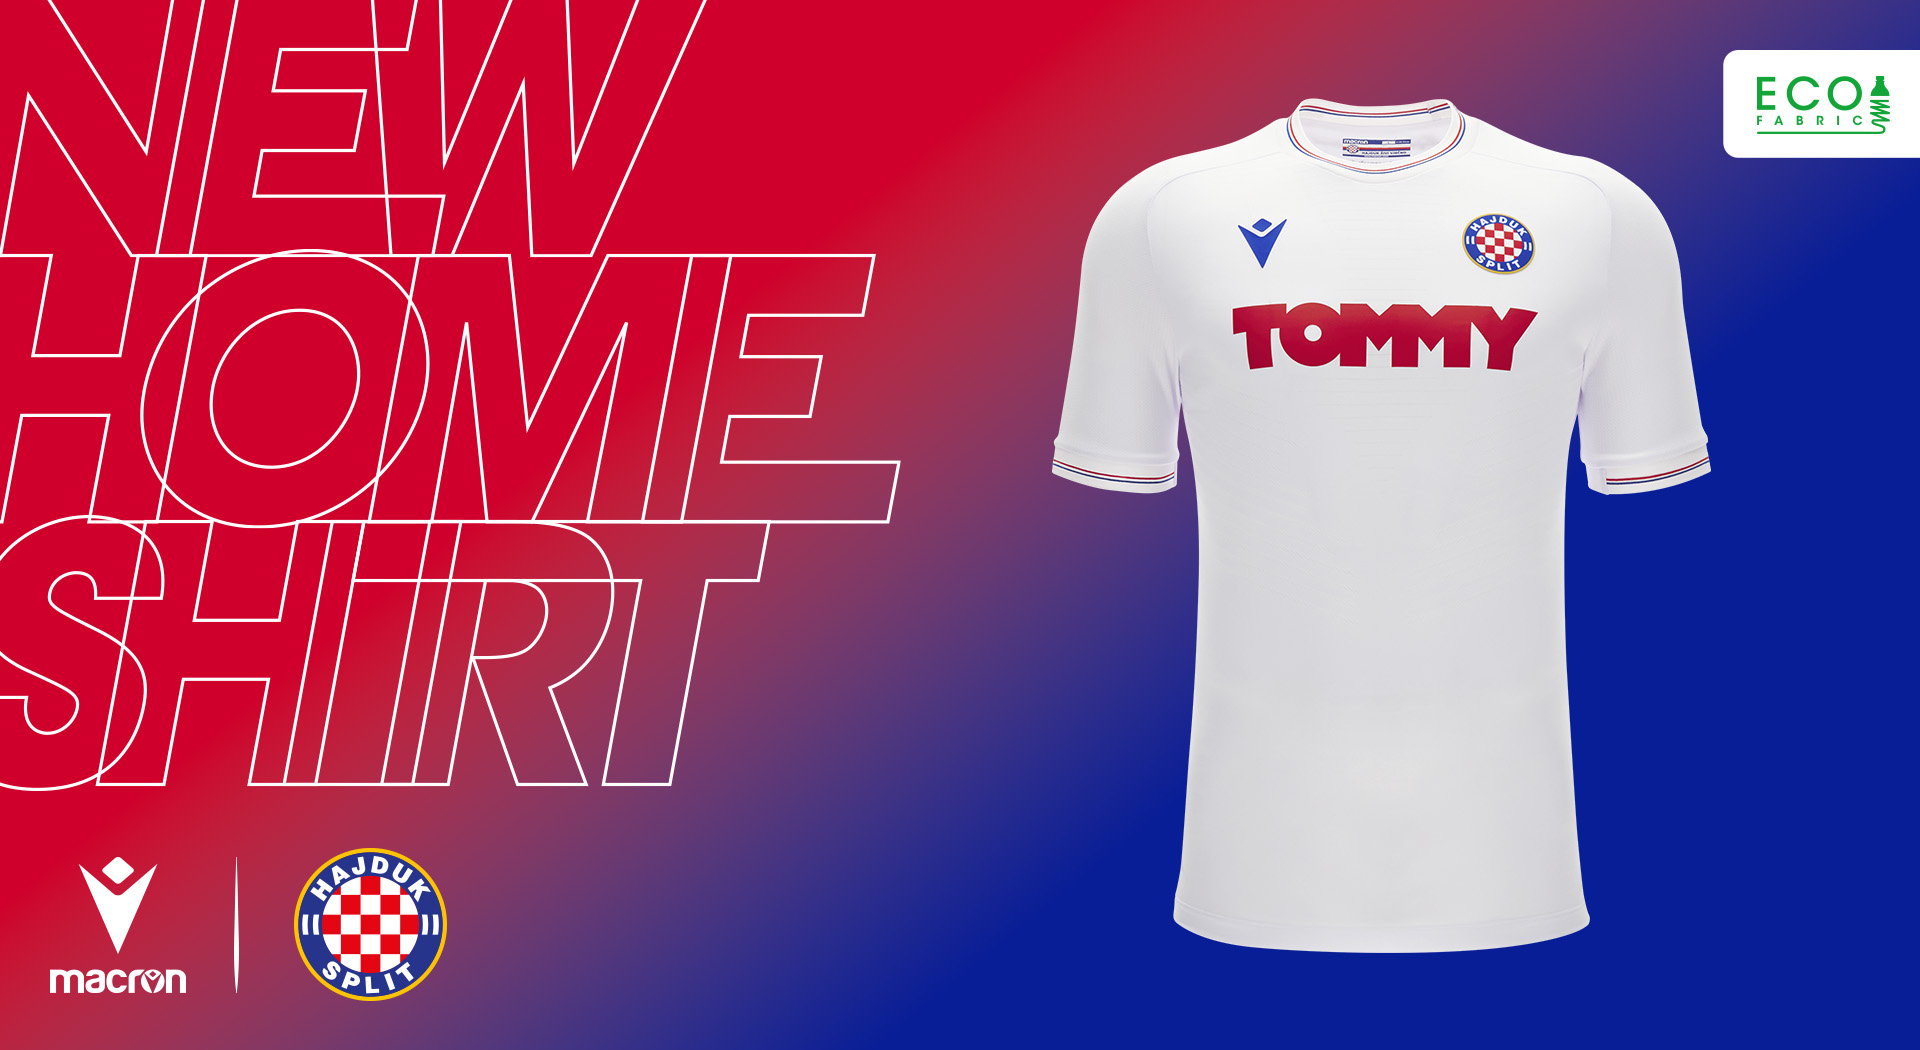 A new high-performance home shirt with a green soul for Hajduk Split!